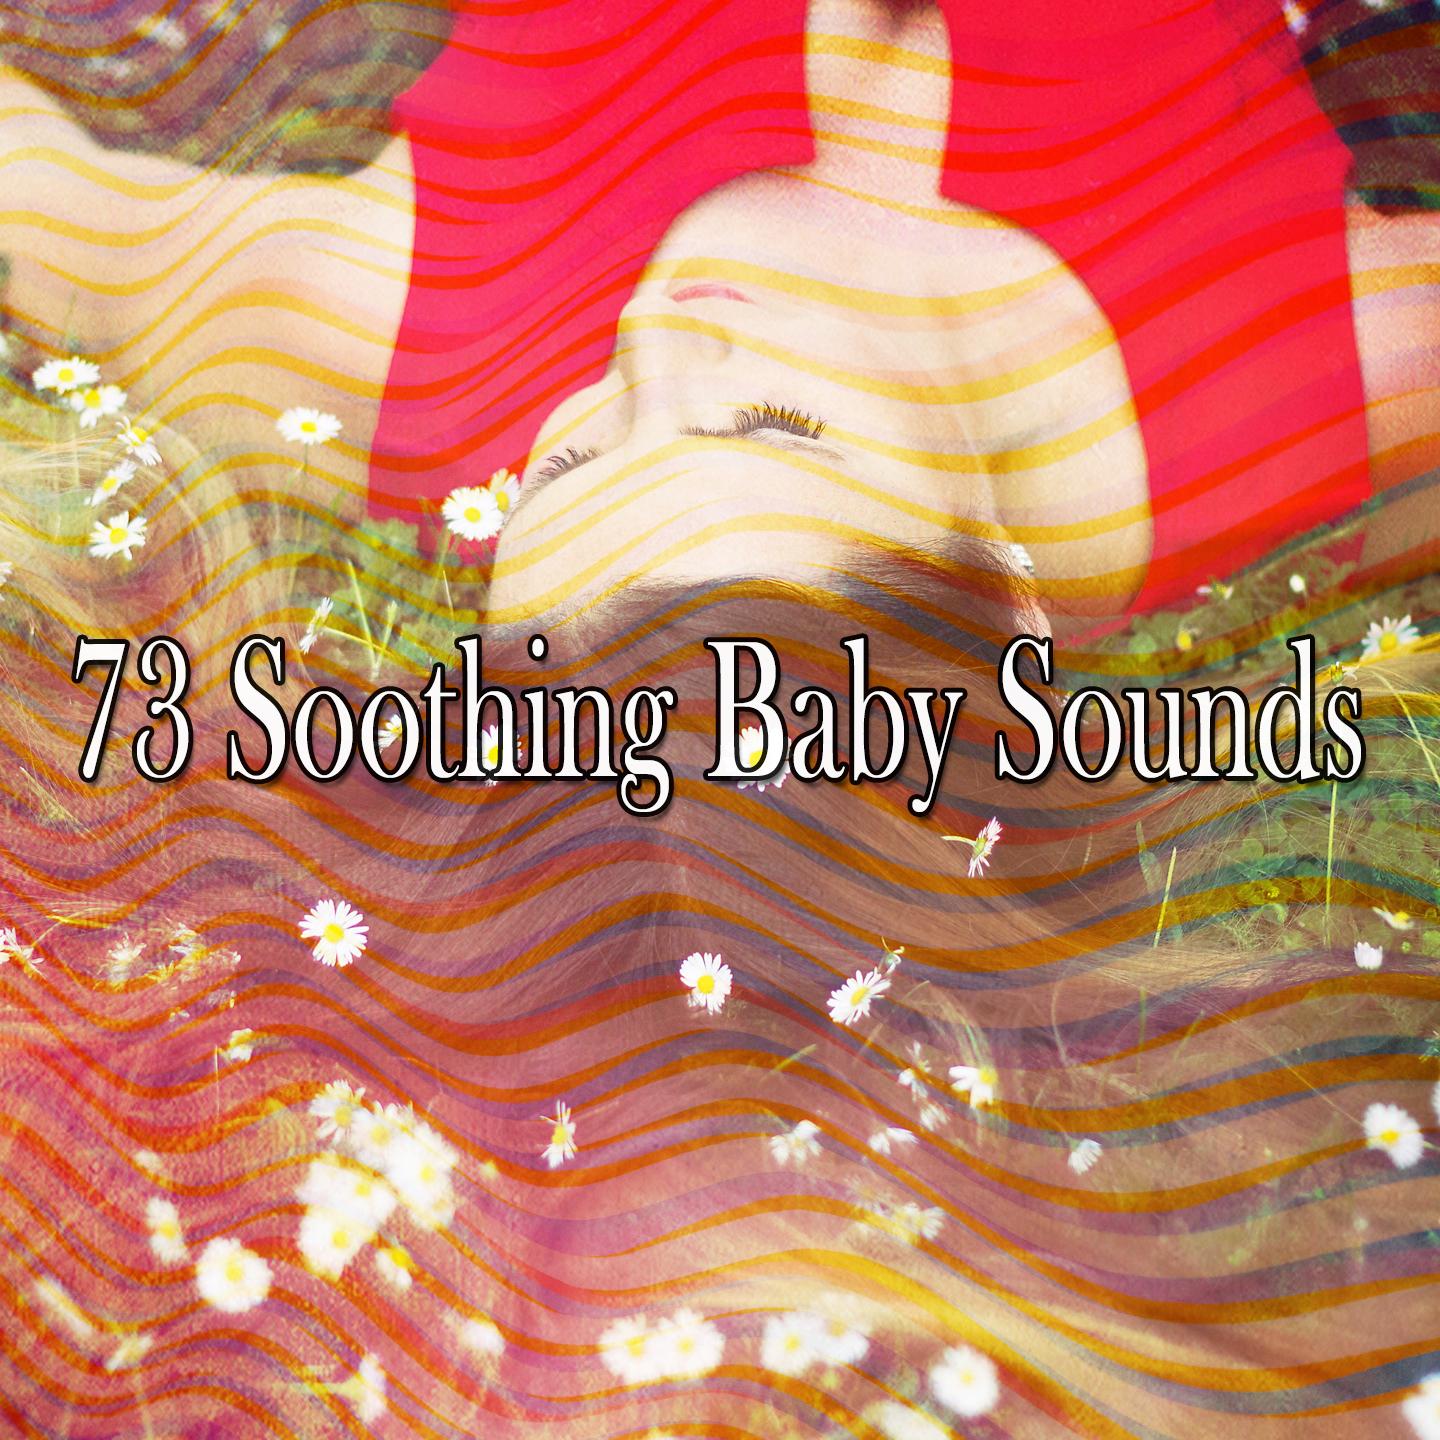 73 Soothing Baby Sounds